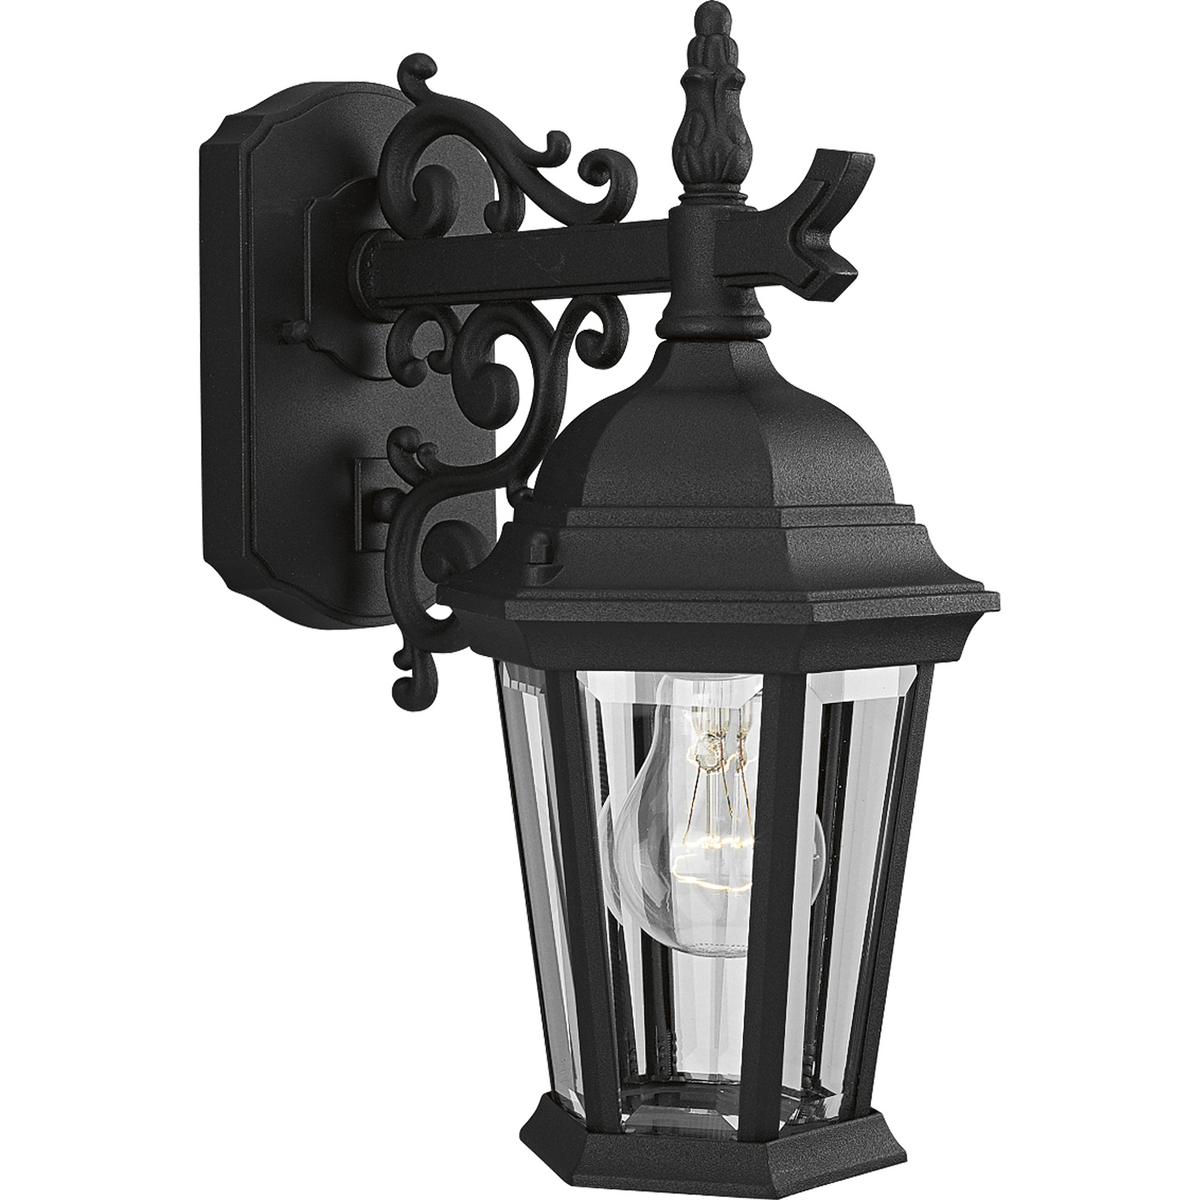 Hubbell P5682-31 The Welbourne collection features hexagonal framework with vine inspired scrolls and clear beveled glass panels. Cast aluminum construction with durable powder coat finish. One-light 6-1/2"  top mount outdoor wall lantern.  ; Hexagonal framework. ; Vine i